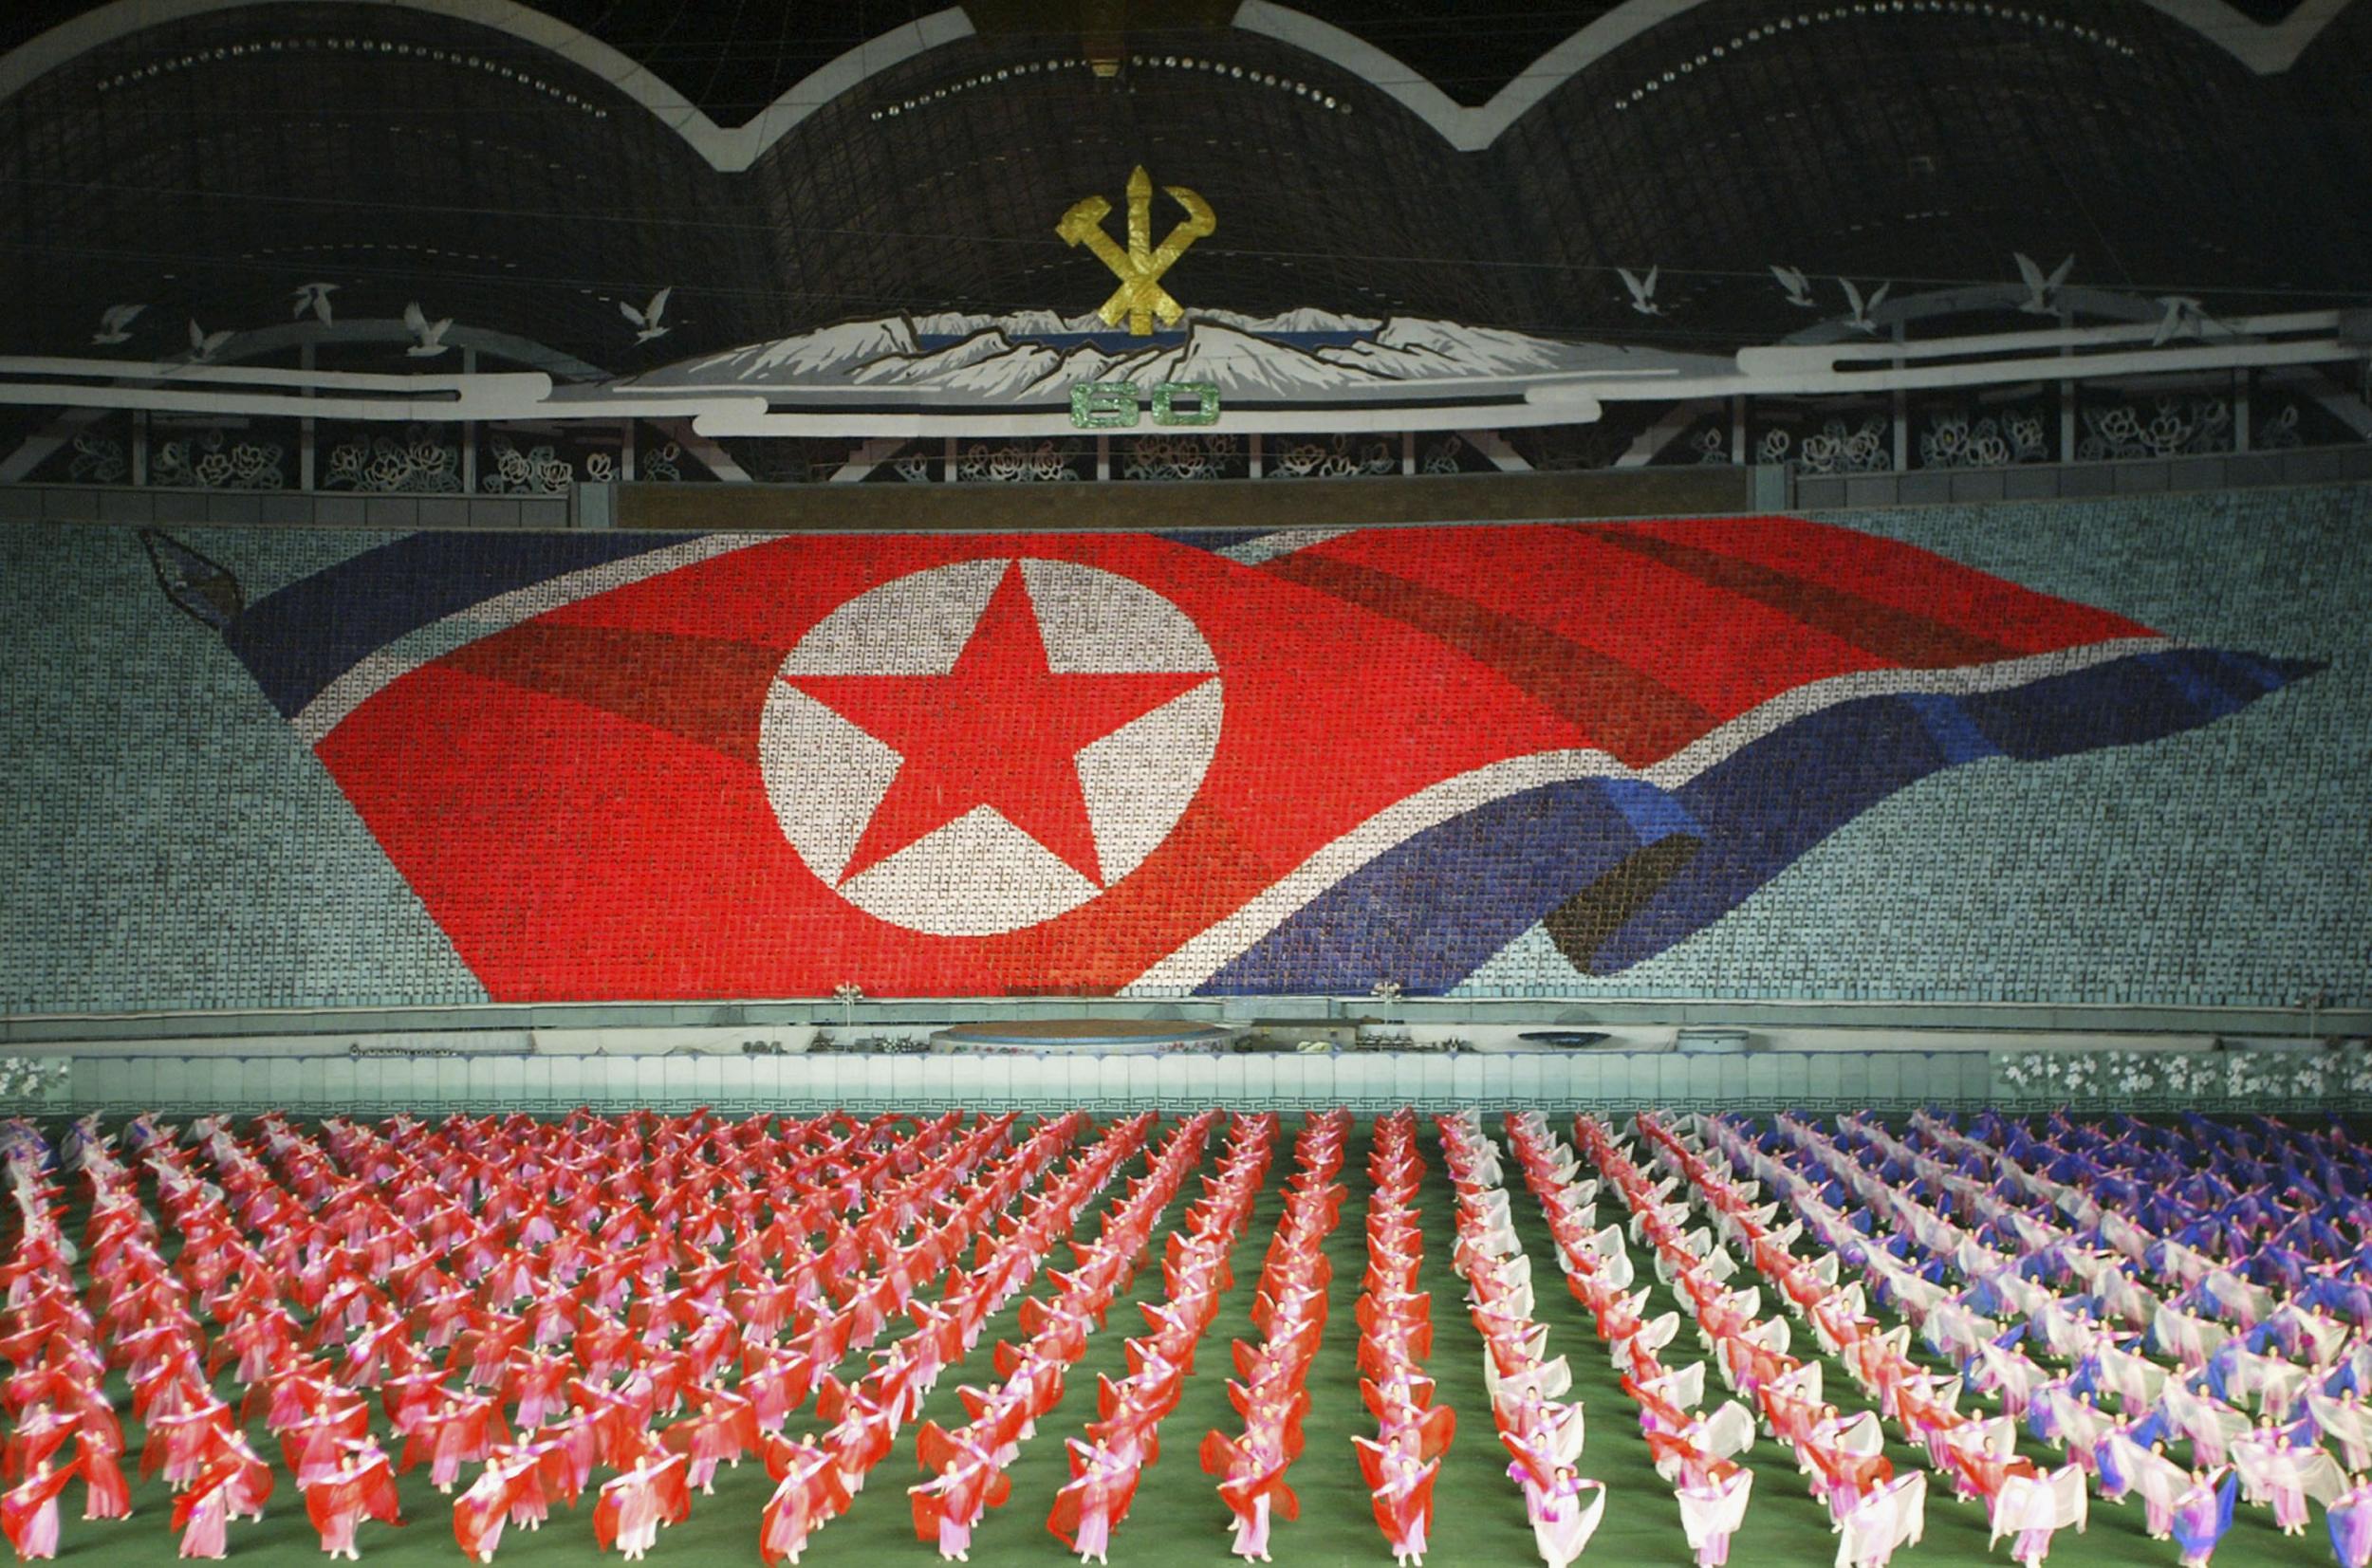 North Koreans perform at the Arirang festival in 2005